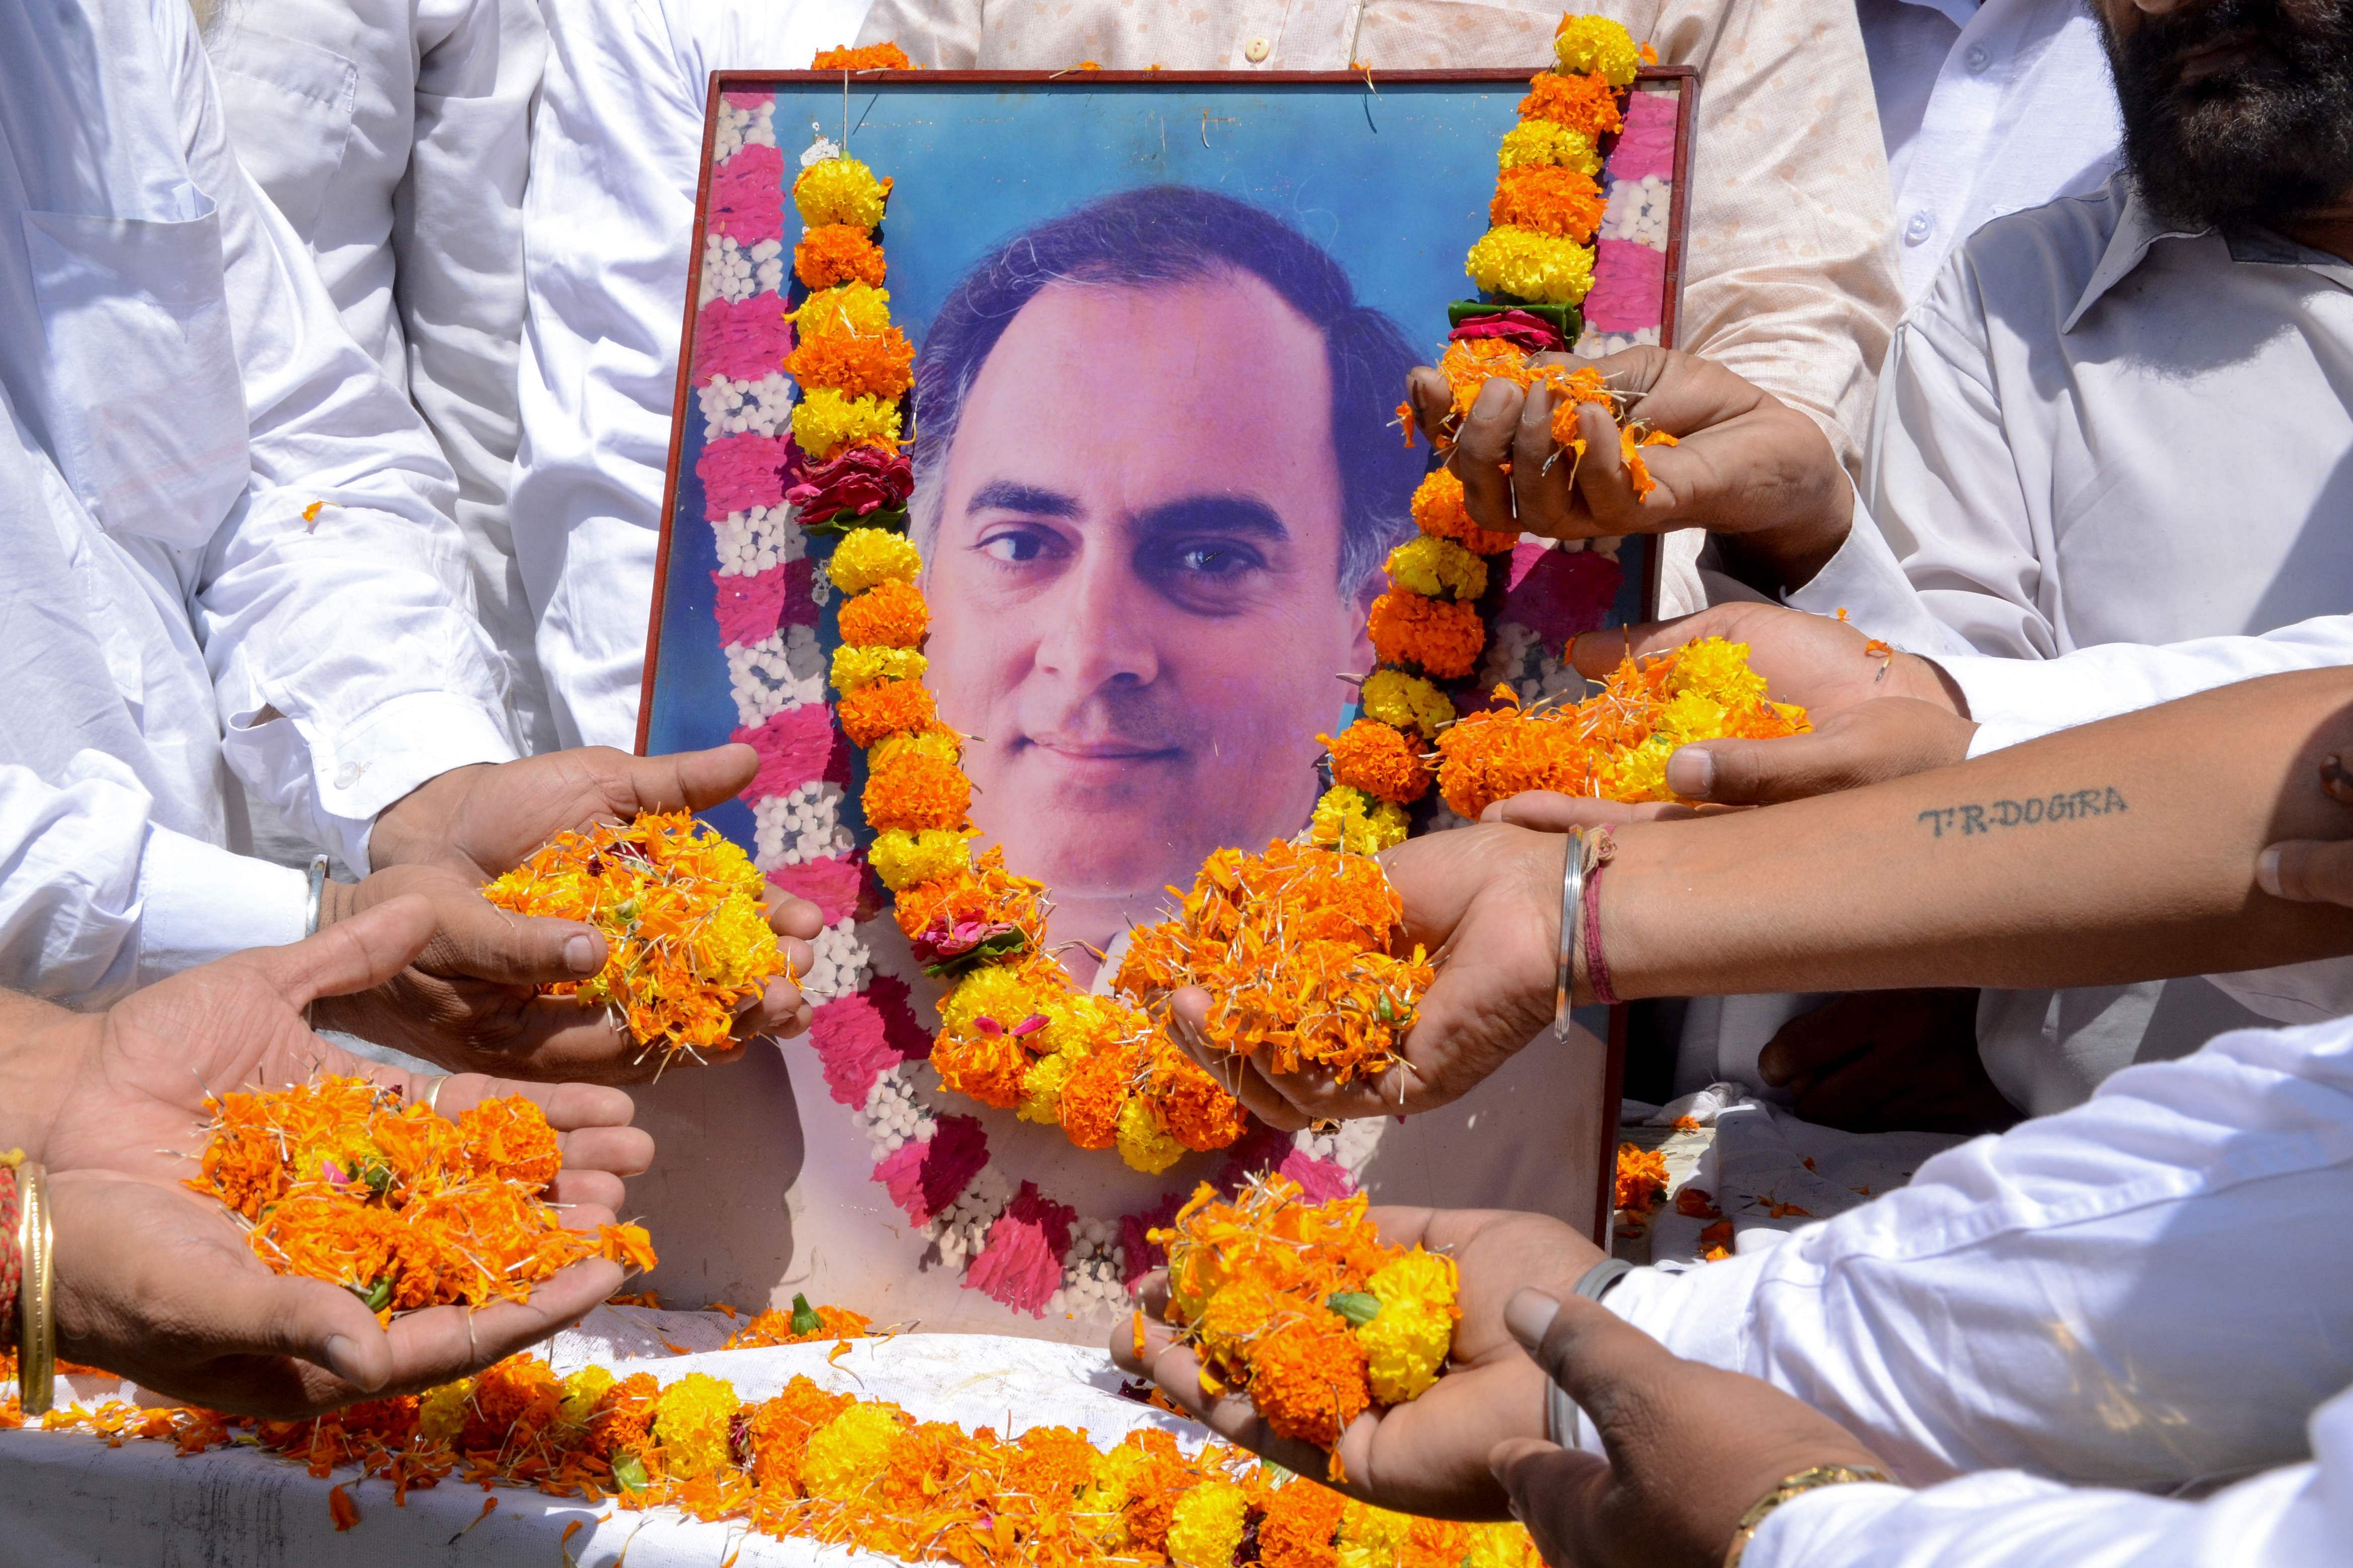 Members of All India Anti-Terrorist Front (AIATF) pay tribute to former Indian prime minister Rajiv Gandhi on the eve of the 28th anniversary of his death, in Amritsar on May 20, 2019. - Rajiv Gandhi was assassinated during an electoral campaign, allegedly by Liberation Tigers of Tamil Eelam (LTTE) rebel separatists, in Sriperumpudur in the southern state of Tamil Nadu on May 21, 1991. Credit: AFP File Photo